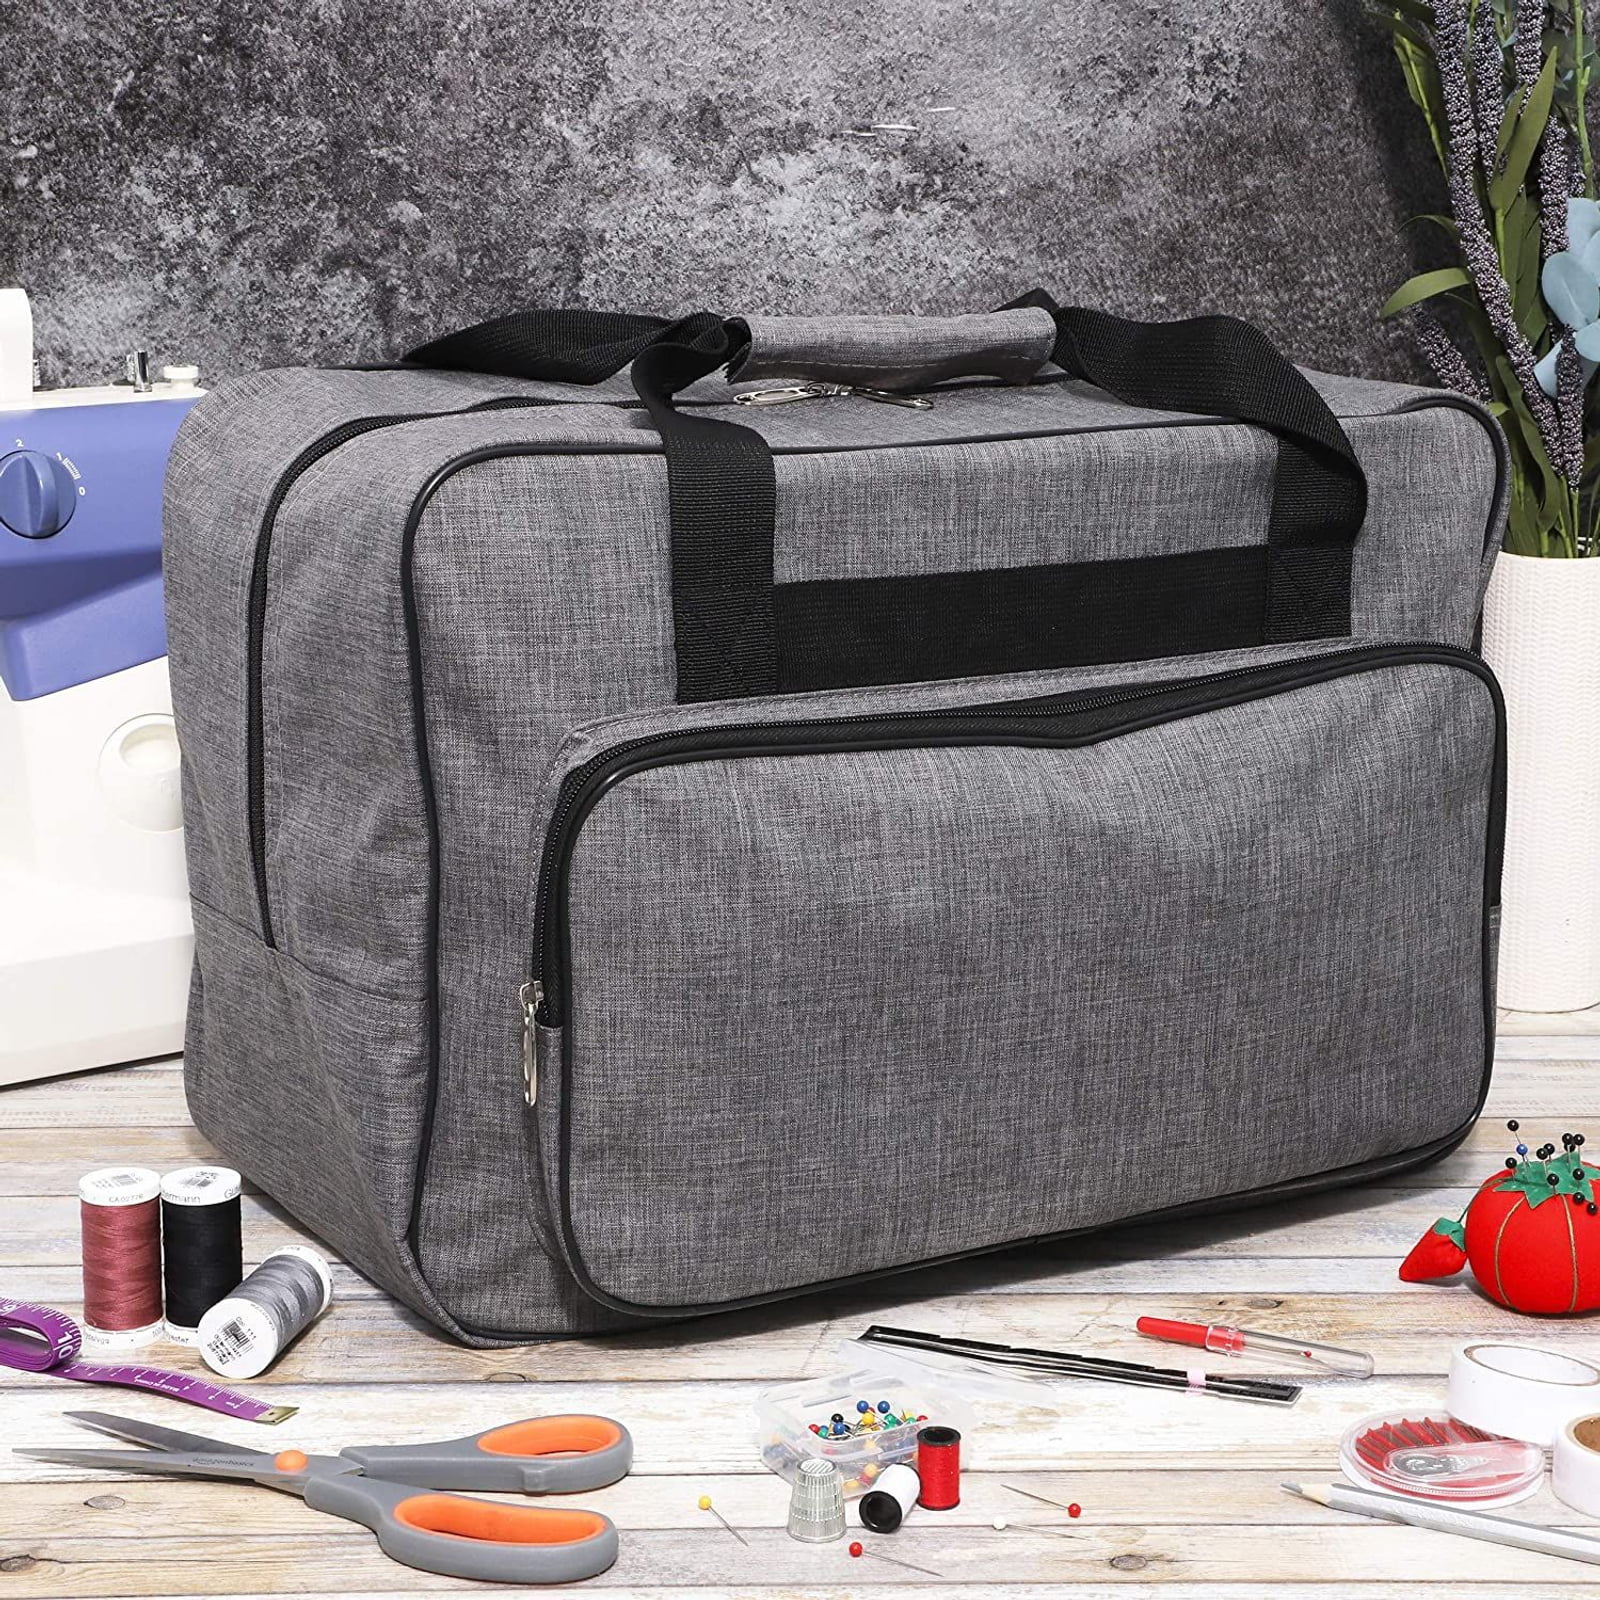 Universal Portable Sewing Machine Carrying Case Compatible with Most Standard Singer Janome Sewing Machine and Accessories Dark Pink Brother YEQIN Sewing Machine Tote Bag 